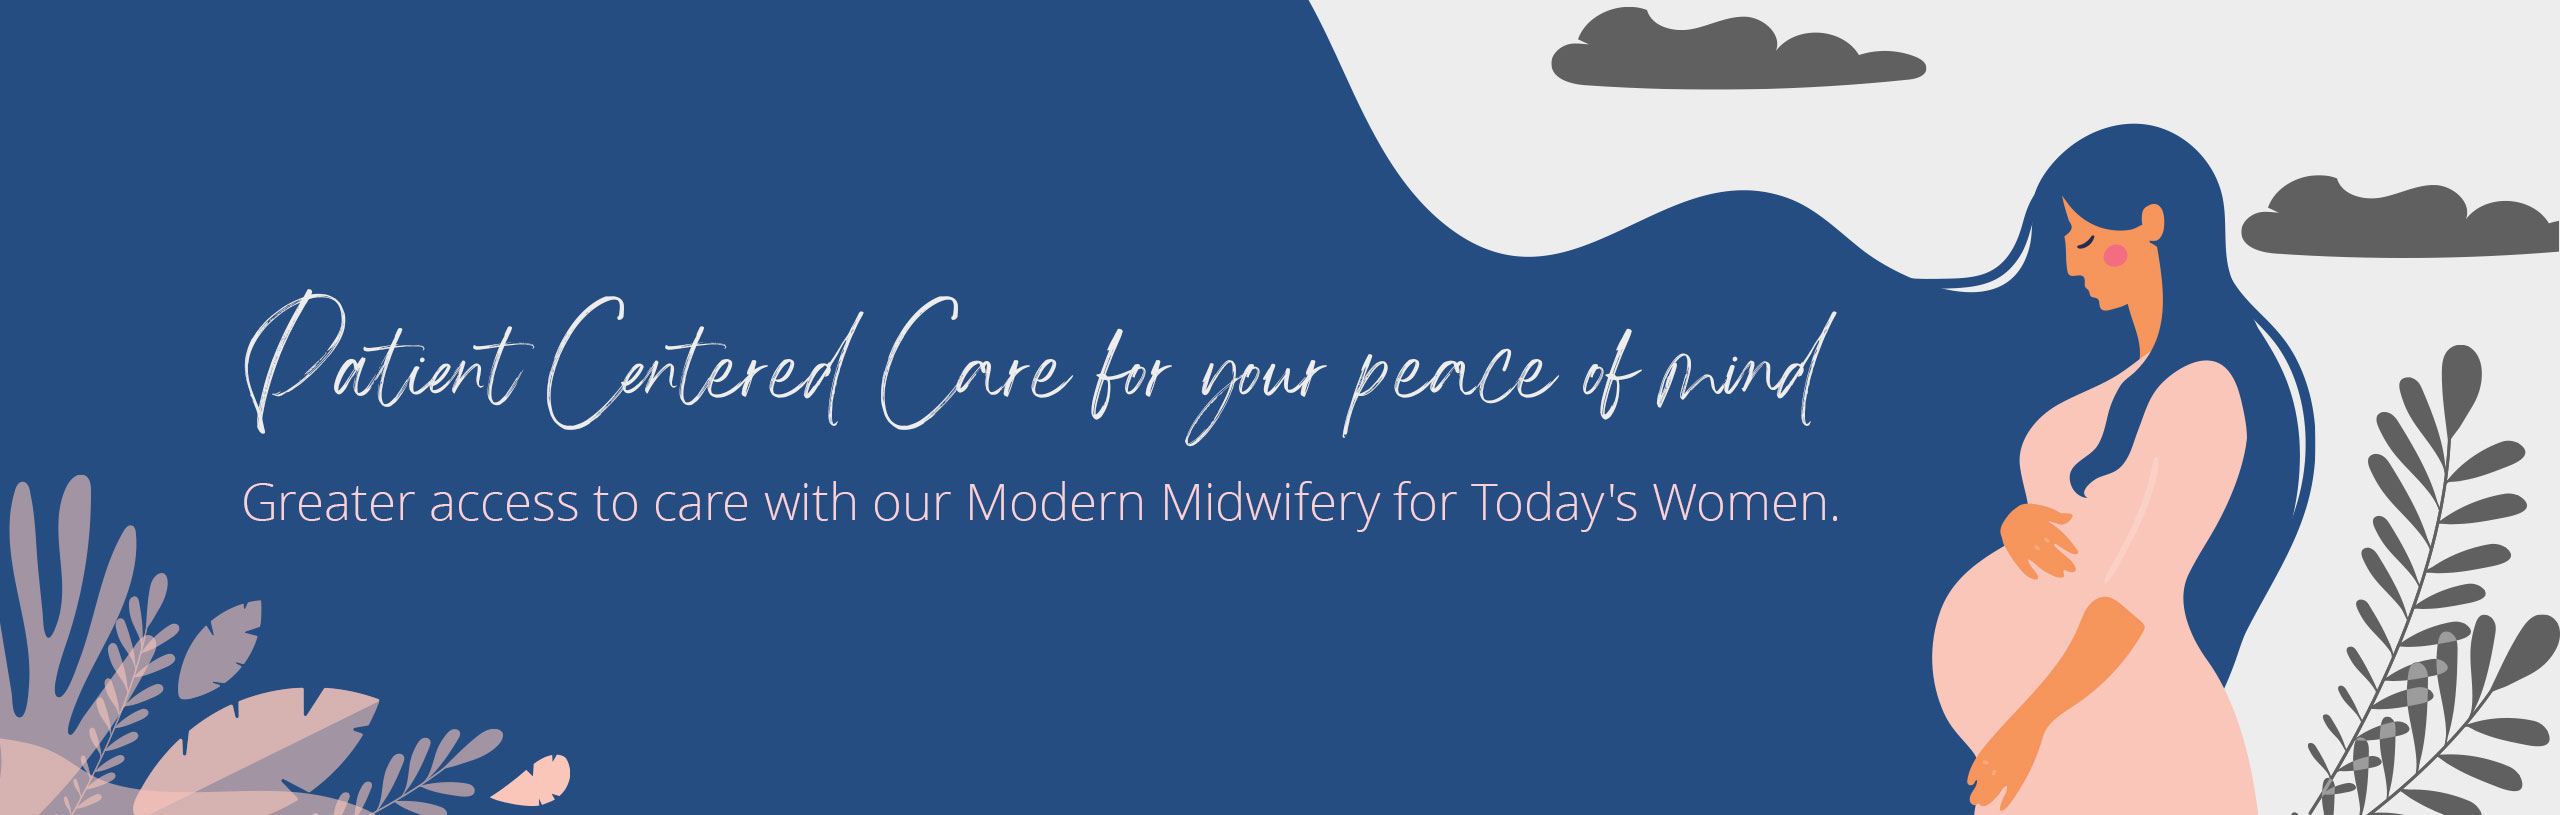 Banner graphic of a pregnant mother with her hands on her belly. Banner says:

Family Focused for your peace of mind\Greater access to care with our Modern Midwifery for Today's Women.